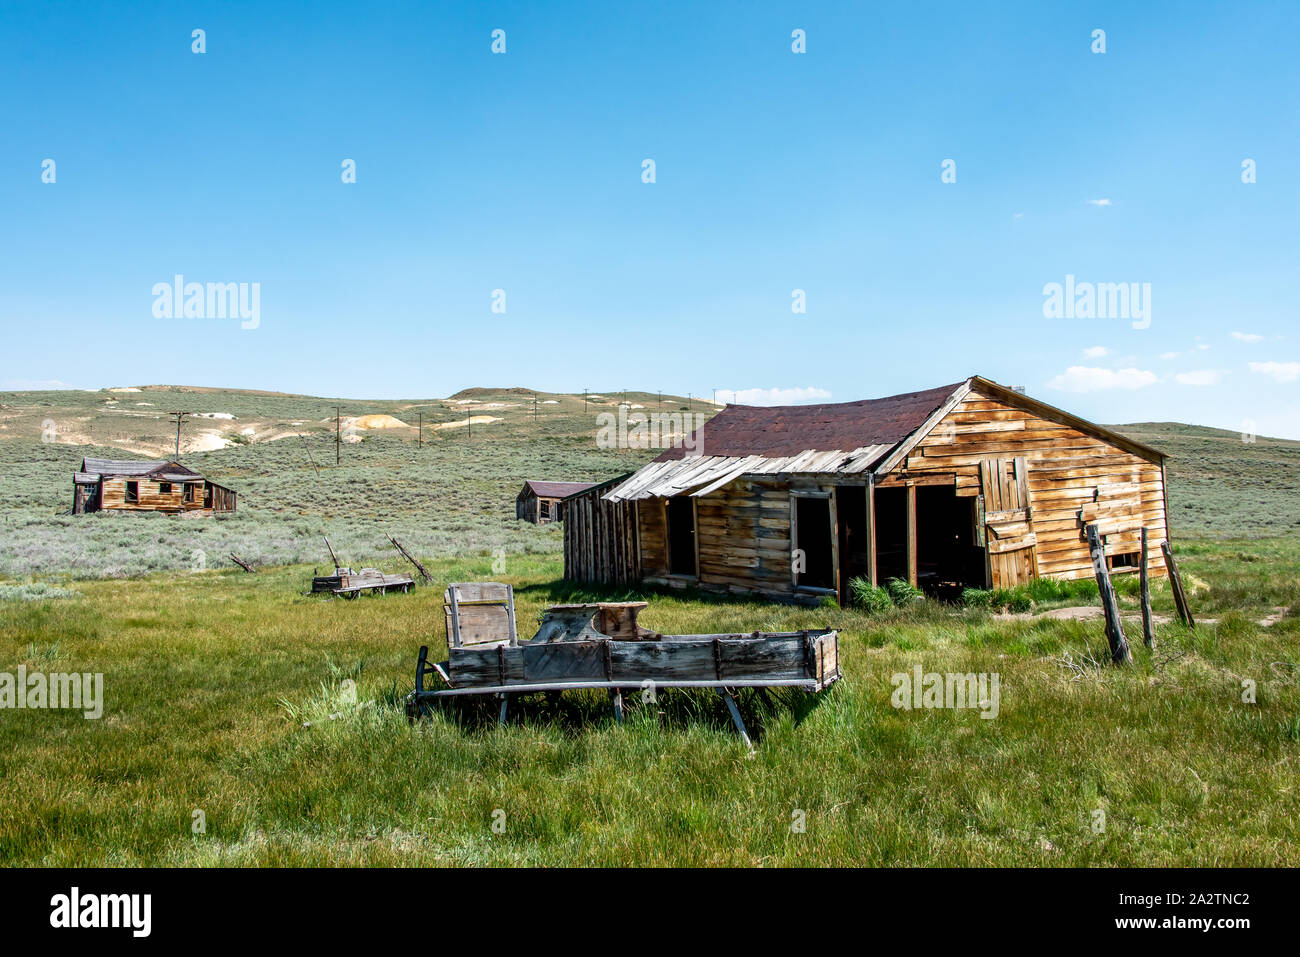 A wooden buckboard or wagon sits abandoned in grass outside a decrepit house or barn at Bodie State Historic Park, a ghost town in California. Stock Photo